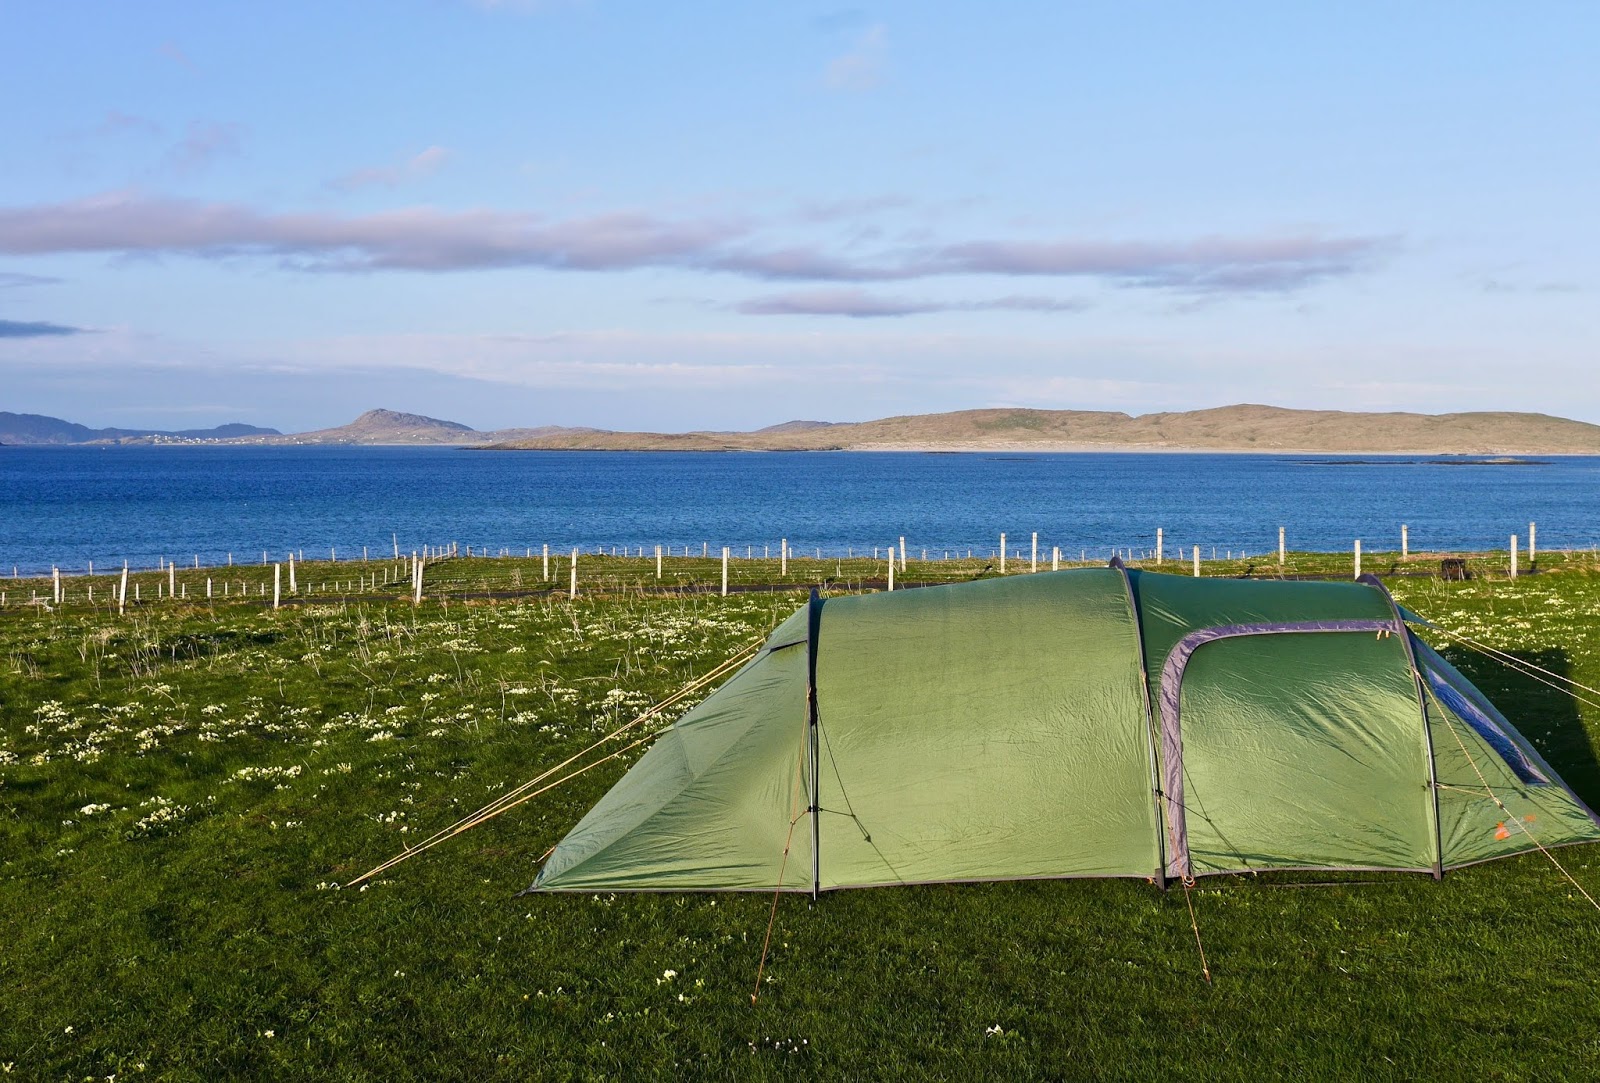 Scurrival Campsite in Barra by Cal McTravel of www.CalMcTraves.com